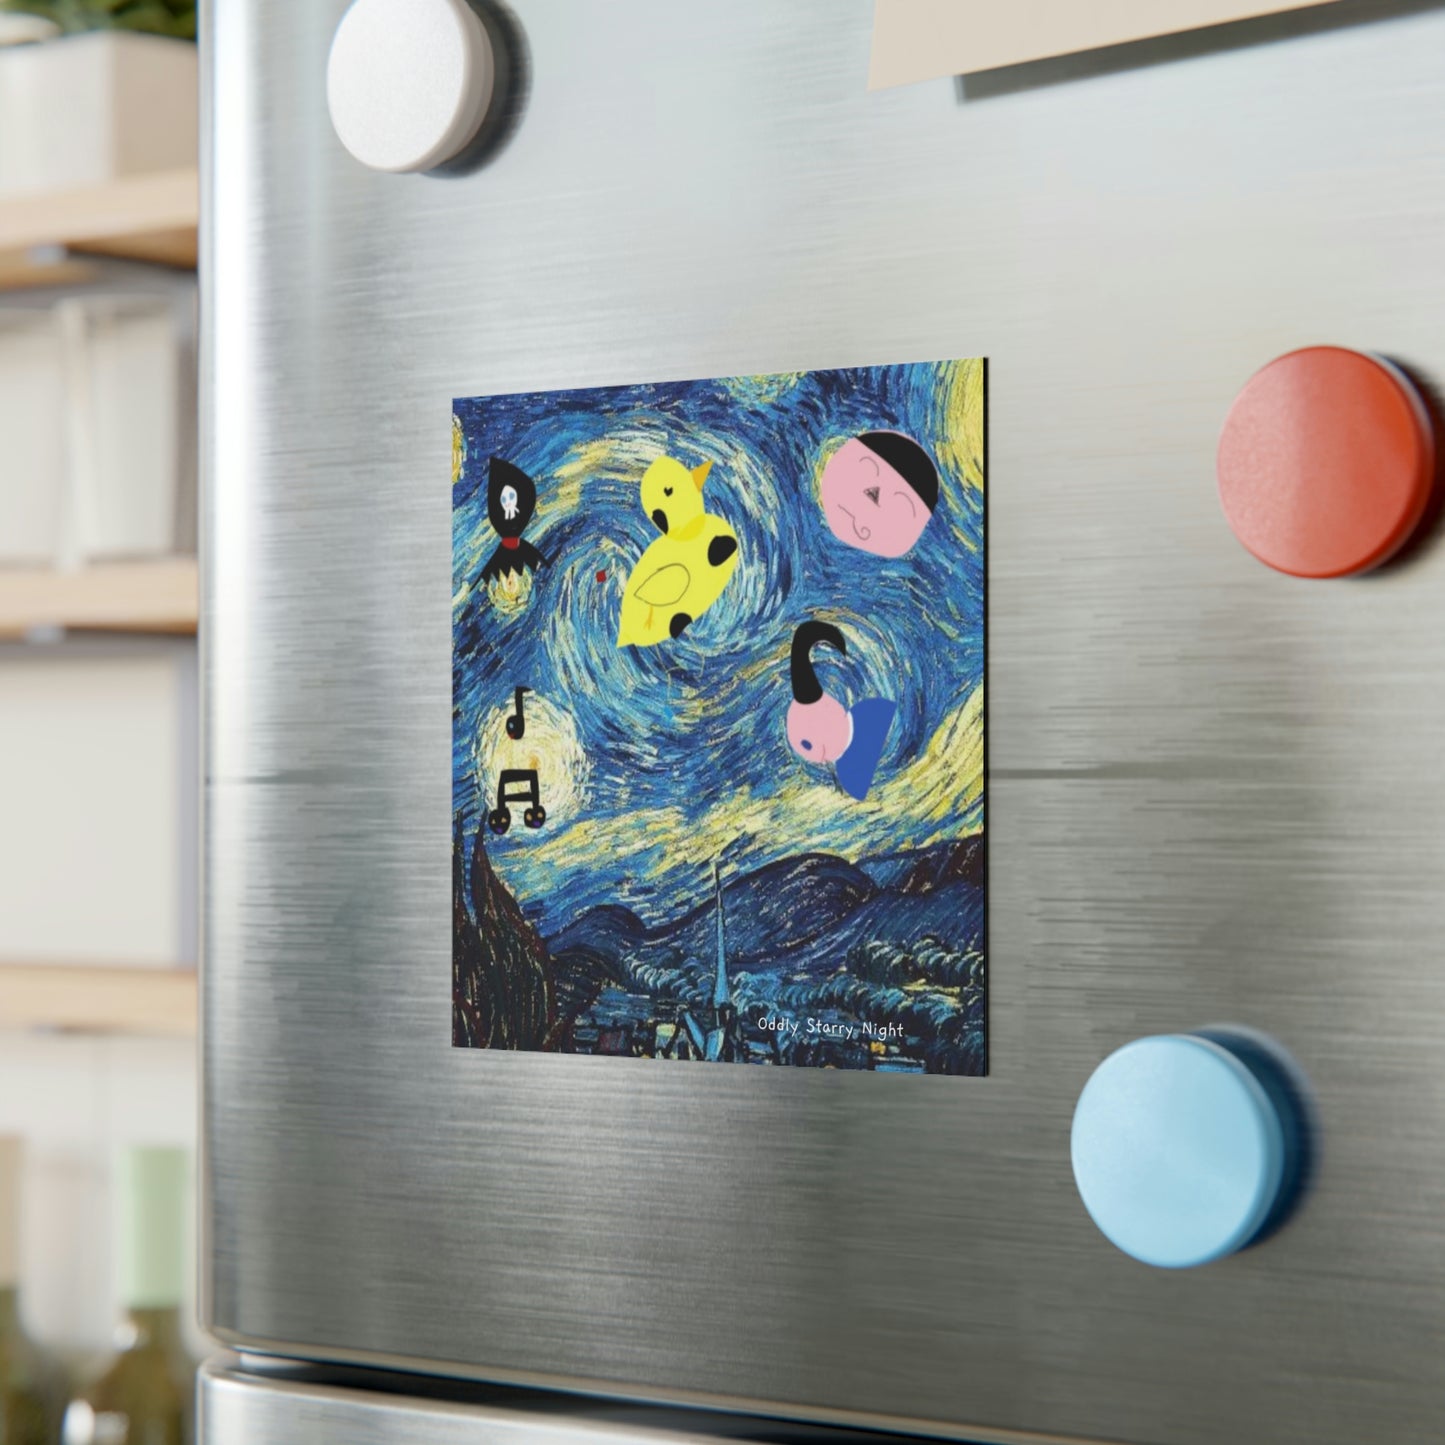 Oddly Starry Night by DB Square Fridge or Whiteboard Magnet